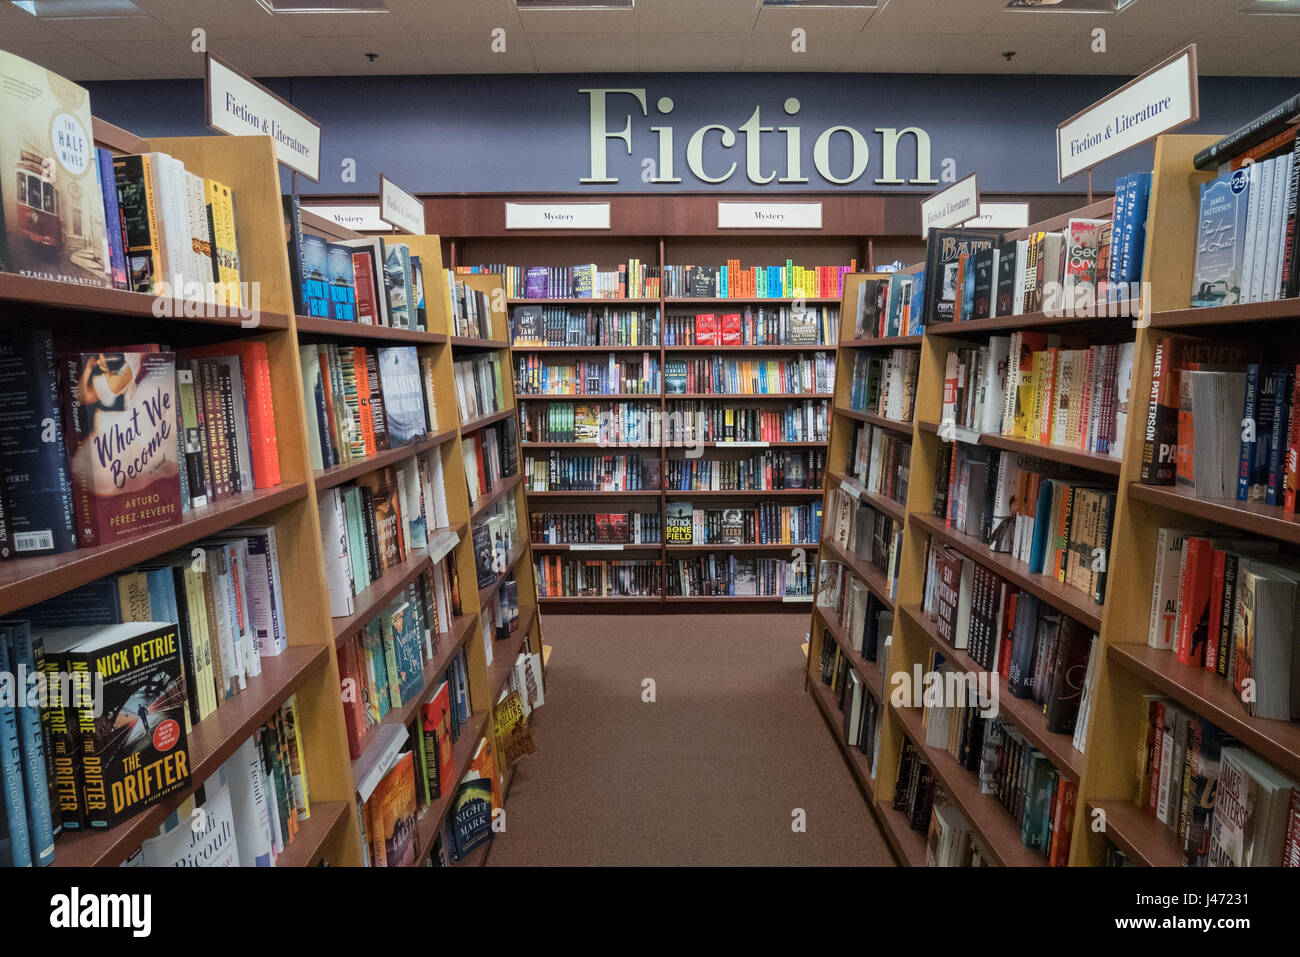 Fiction book section at a book store Stock Photo